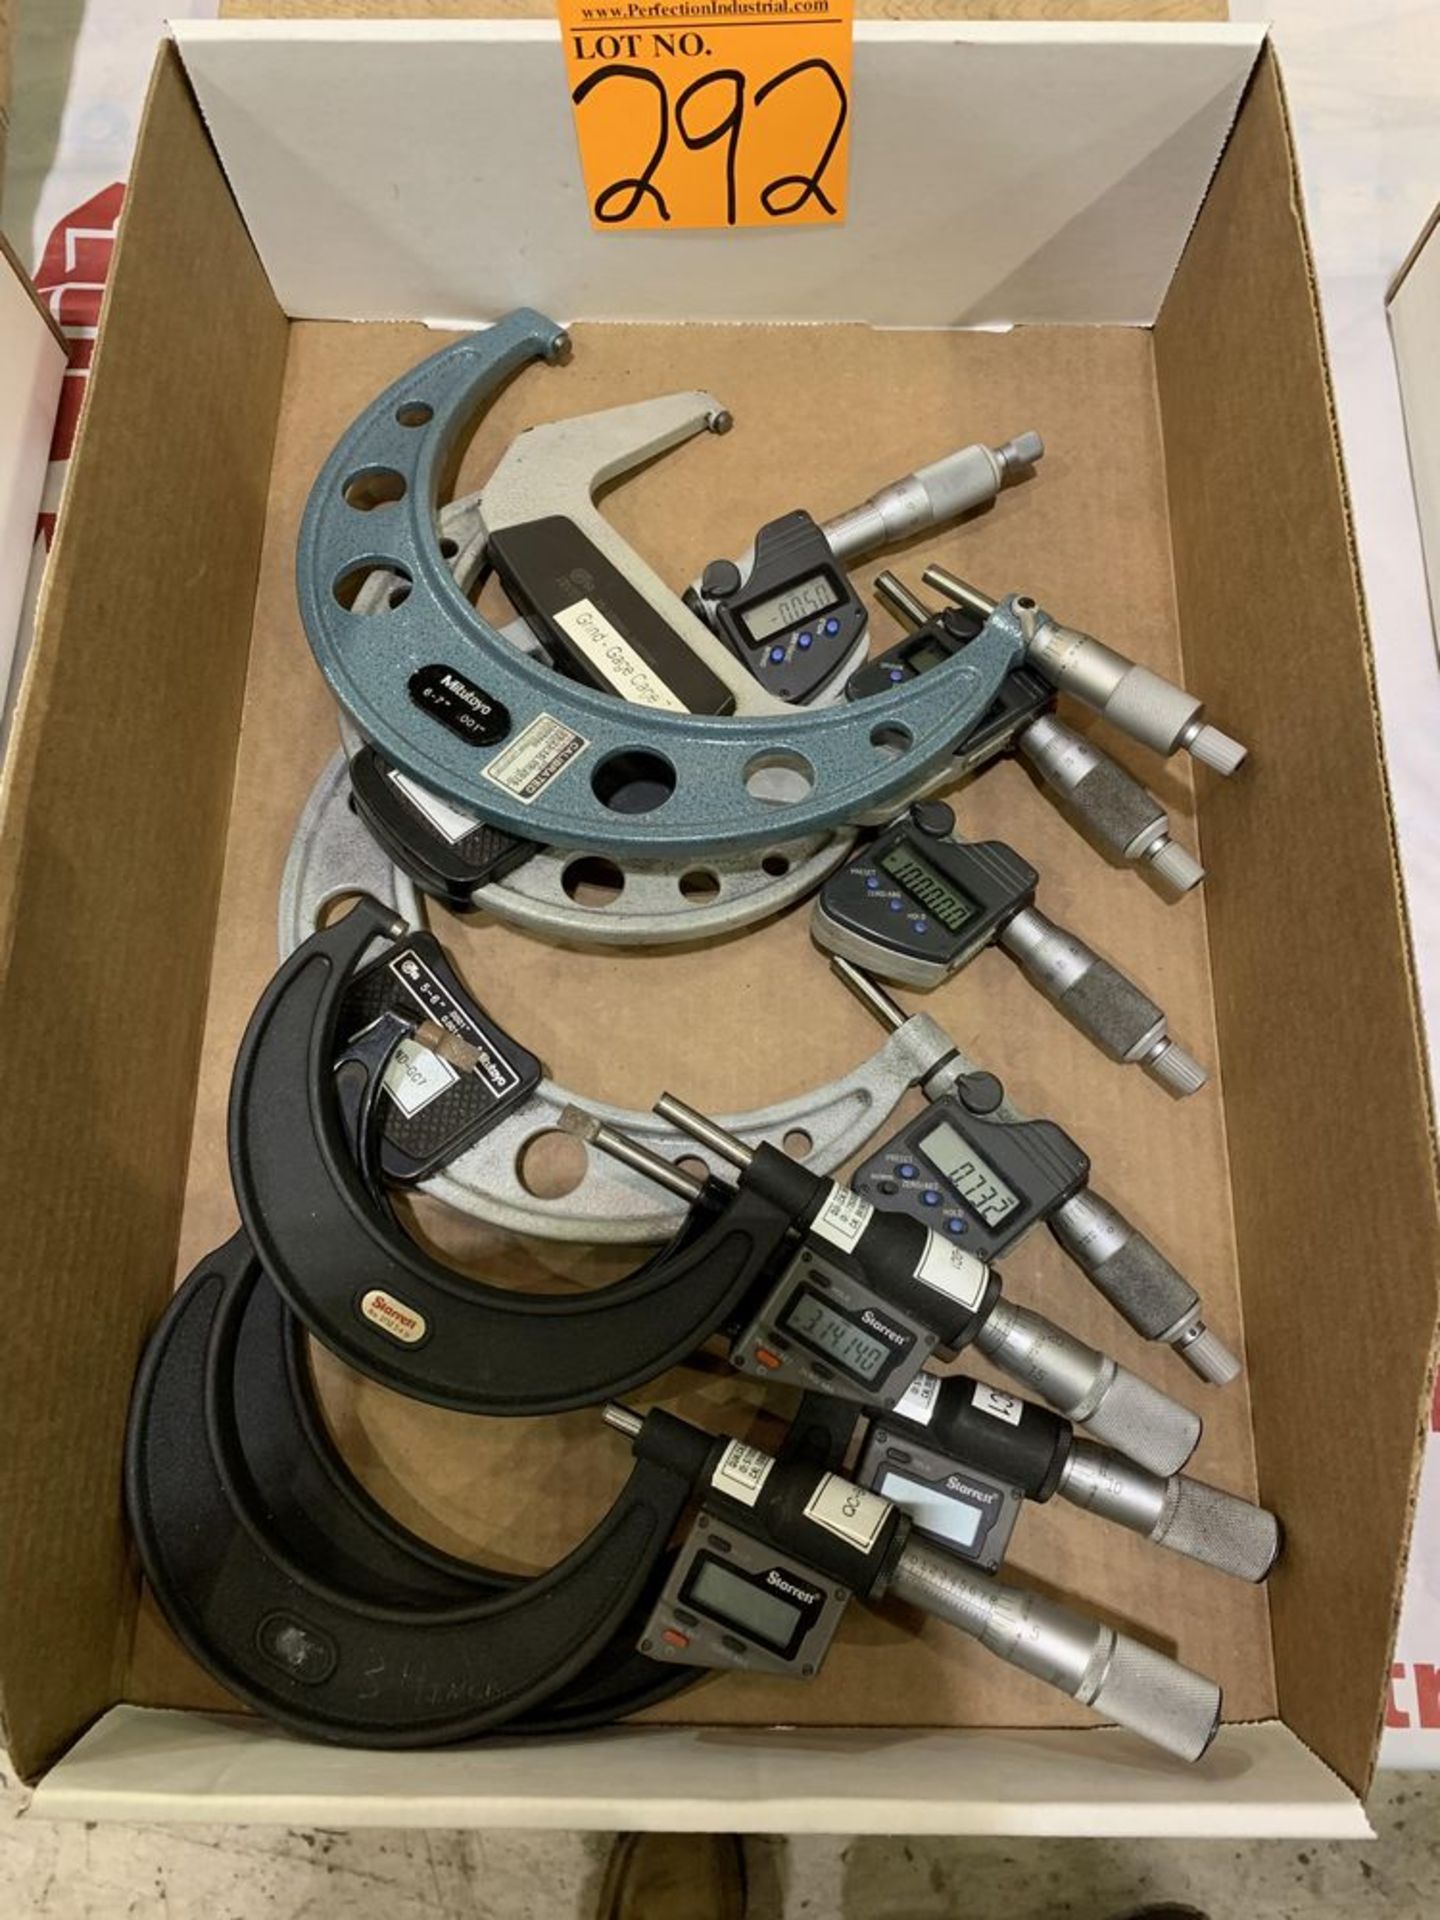 Lot of Assorted Metric and Standard Dial and Digital Outside Micrometers